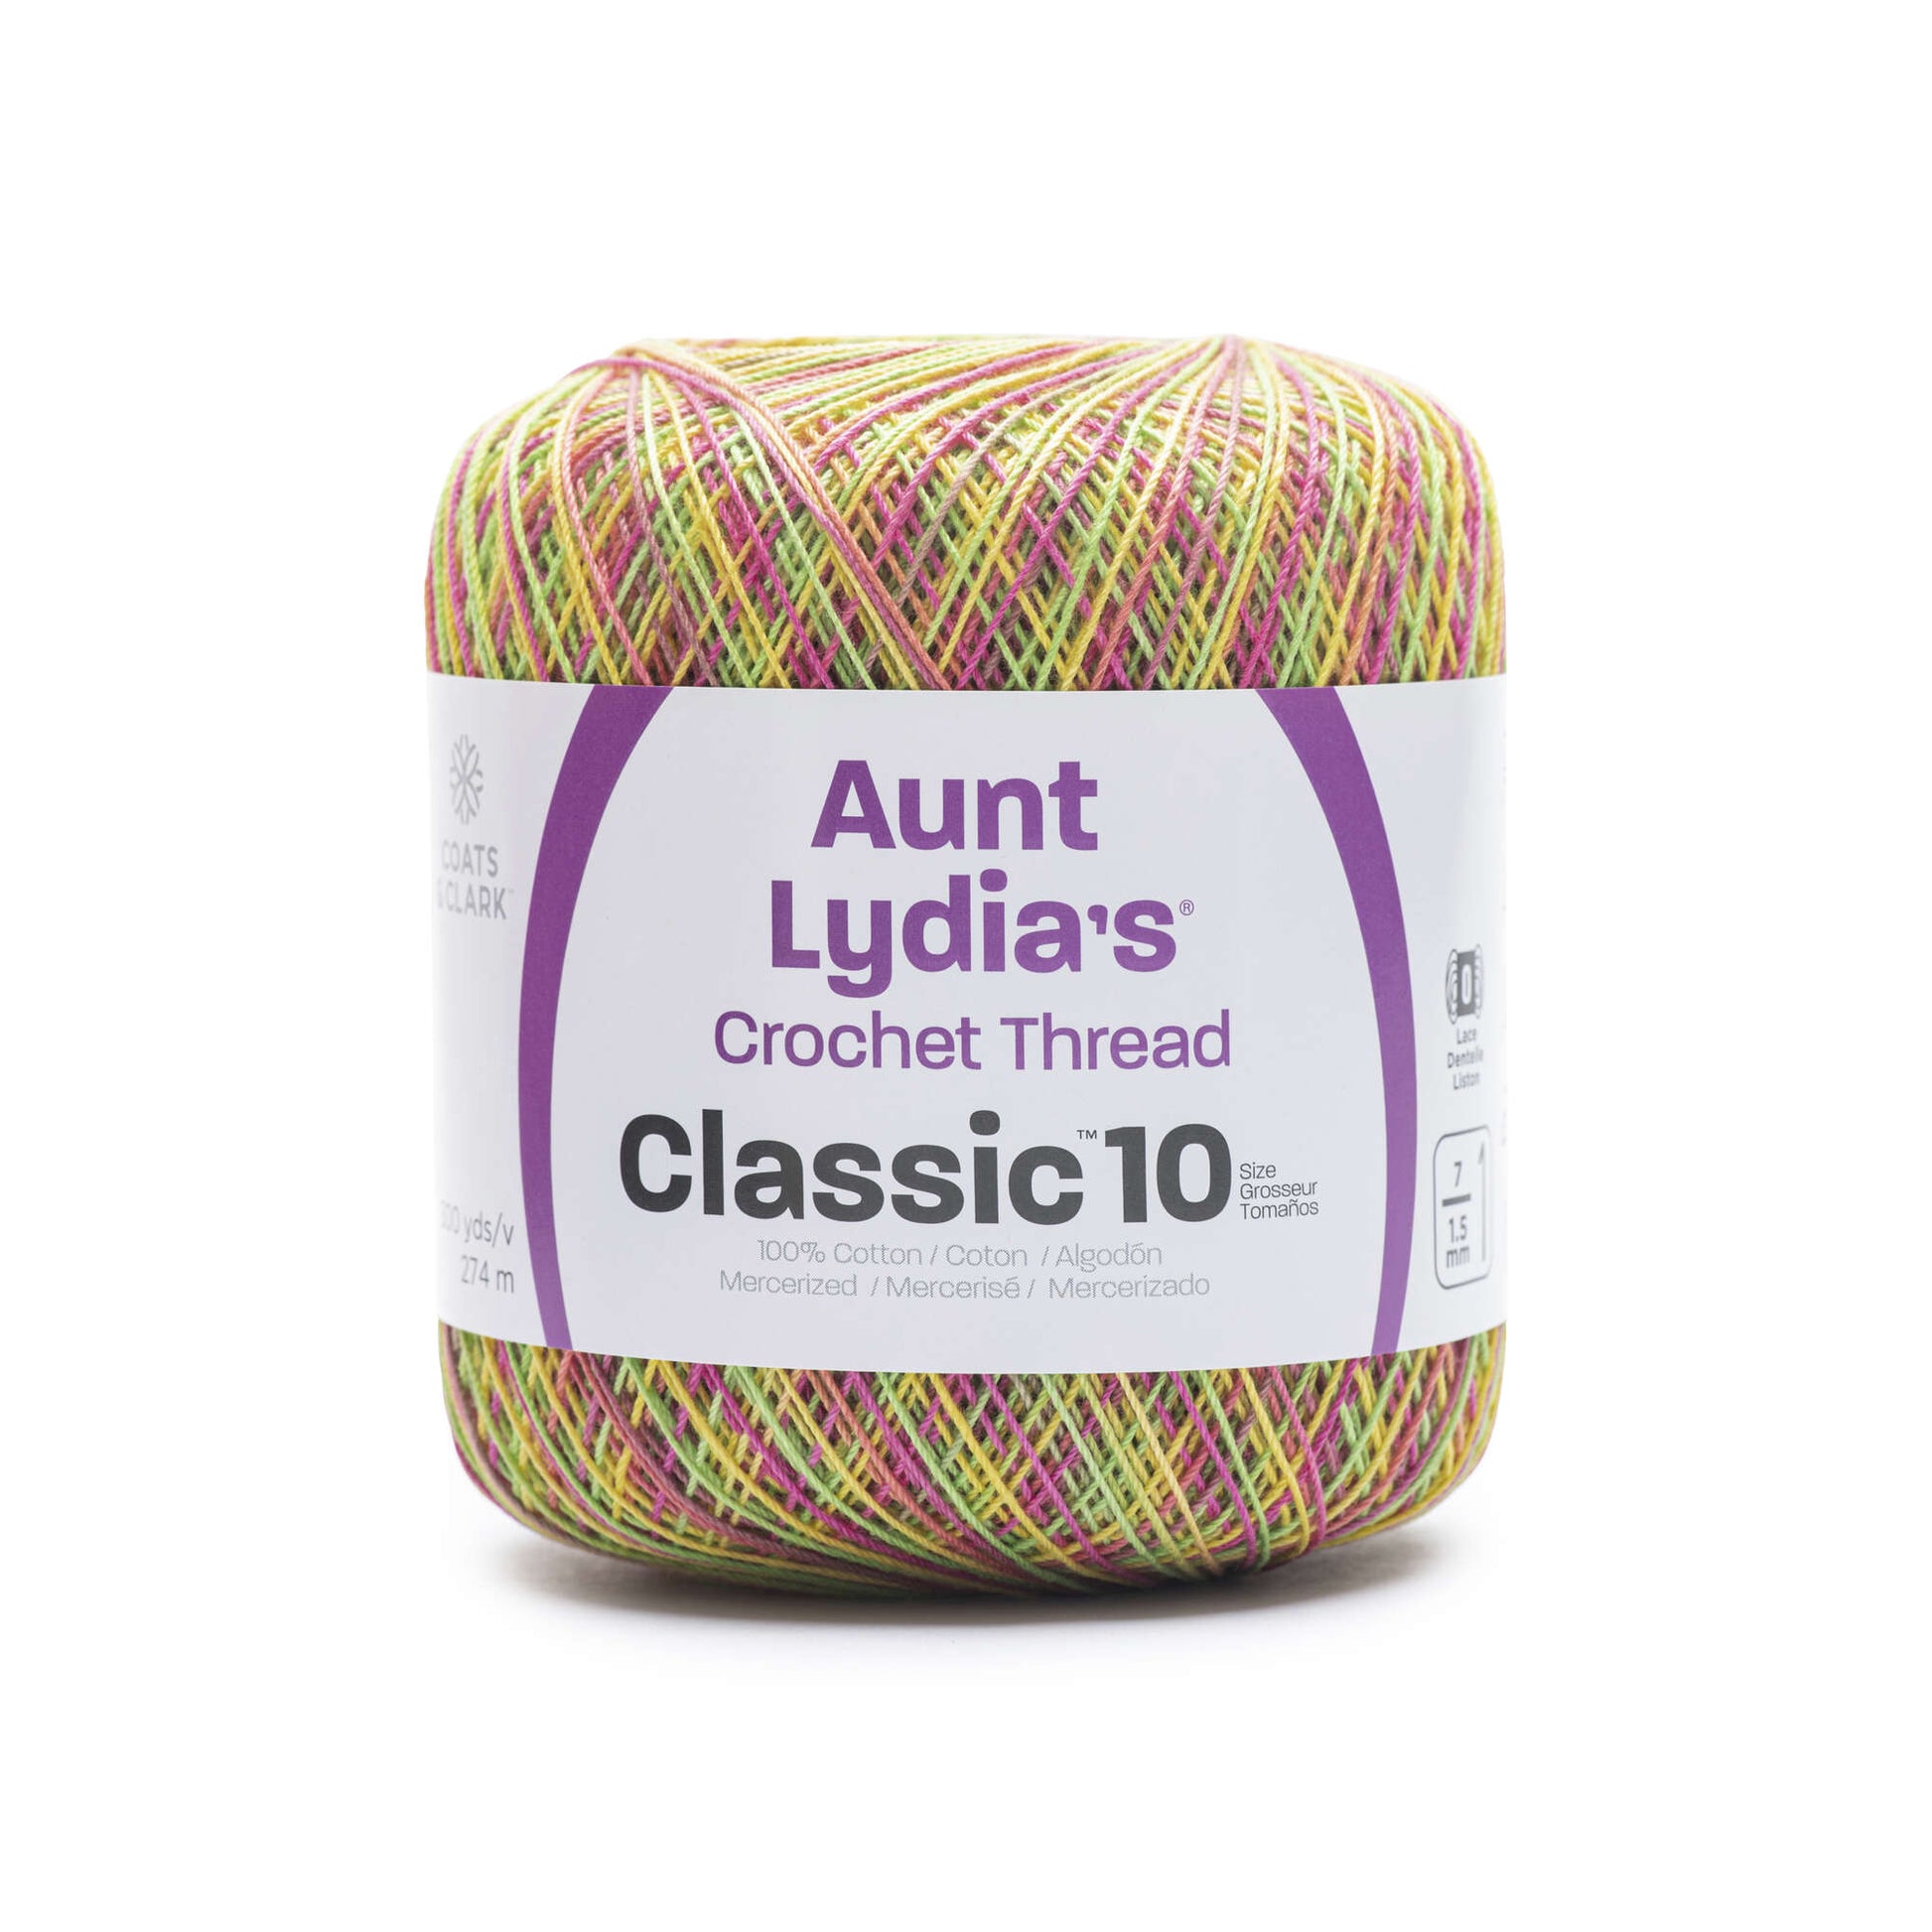  Aunt Lydia's Crochet Thread - Size 10 - Cardinal Red